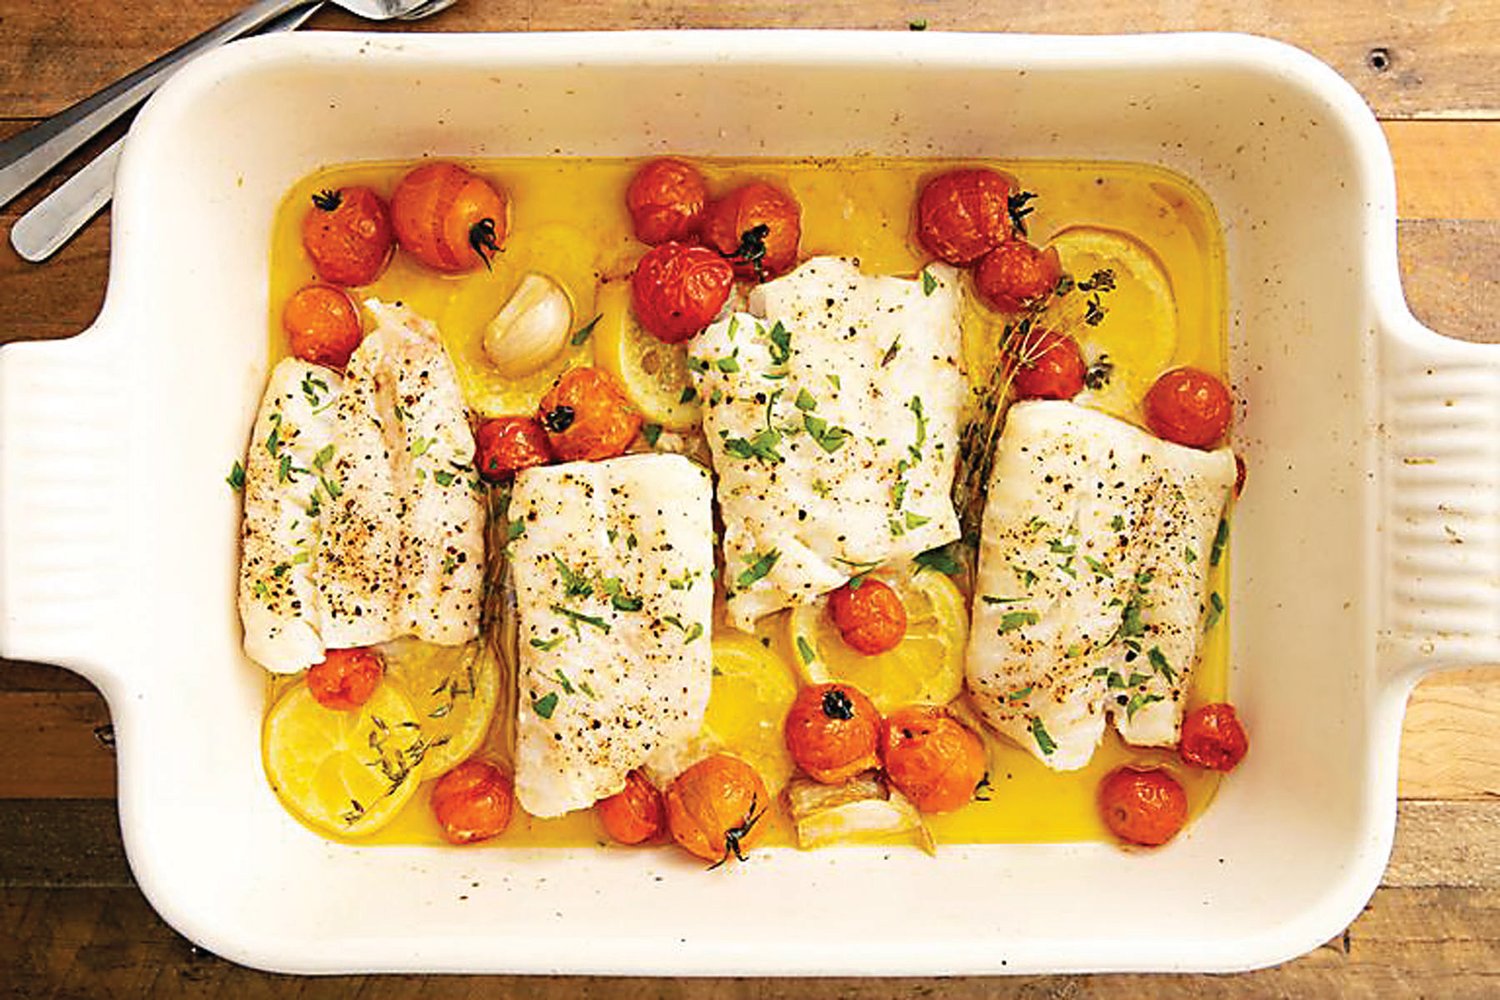 If you are looking for a simple fish dish to serve on Christmas Eve or any other time, this baked cod recipe fits the bill.